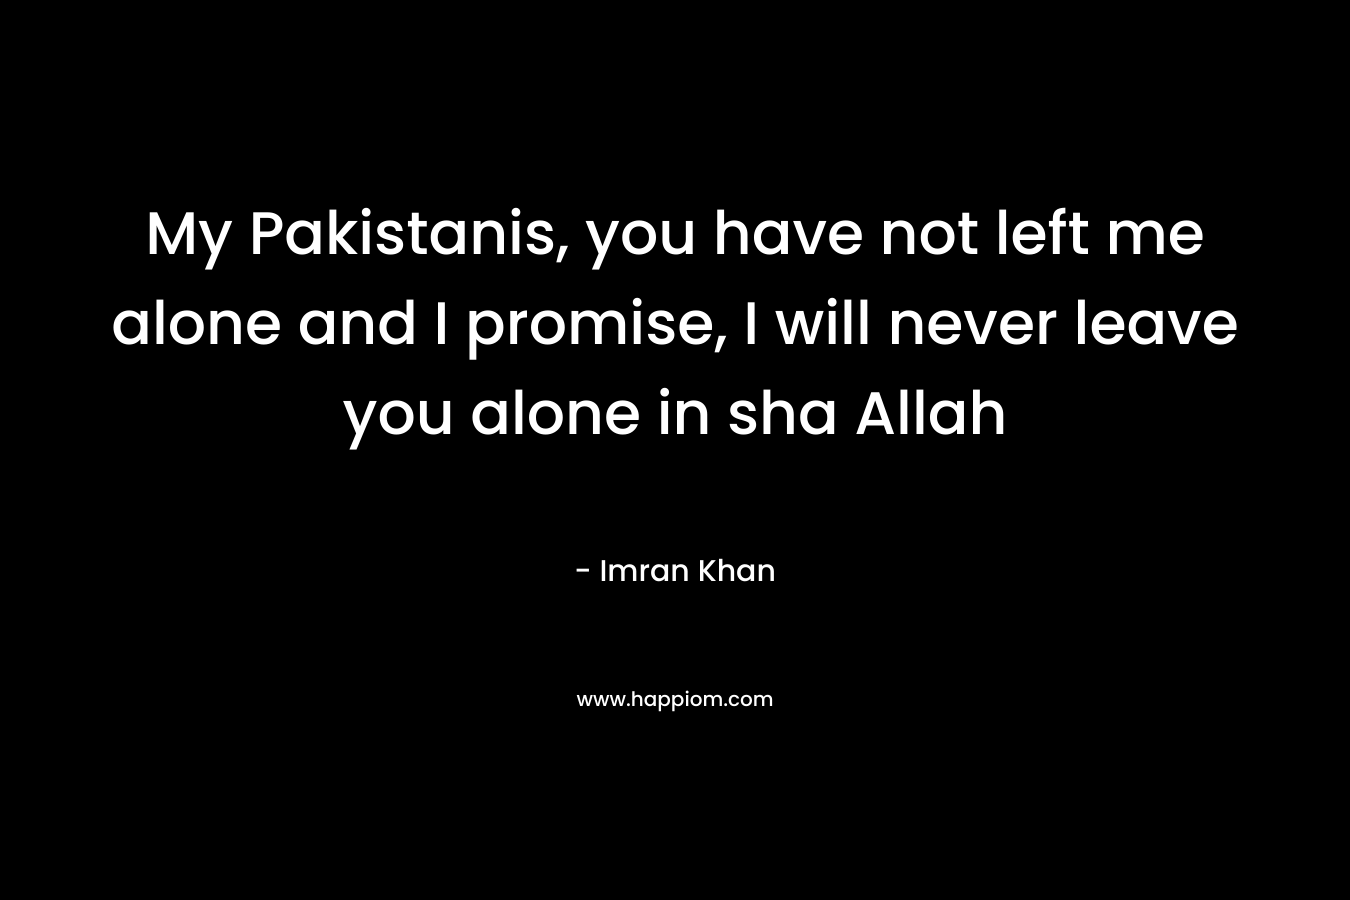 My Pakistanis, you have not left me alone and I promise, I will never leave you alone in sha Allah – Imran Khan